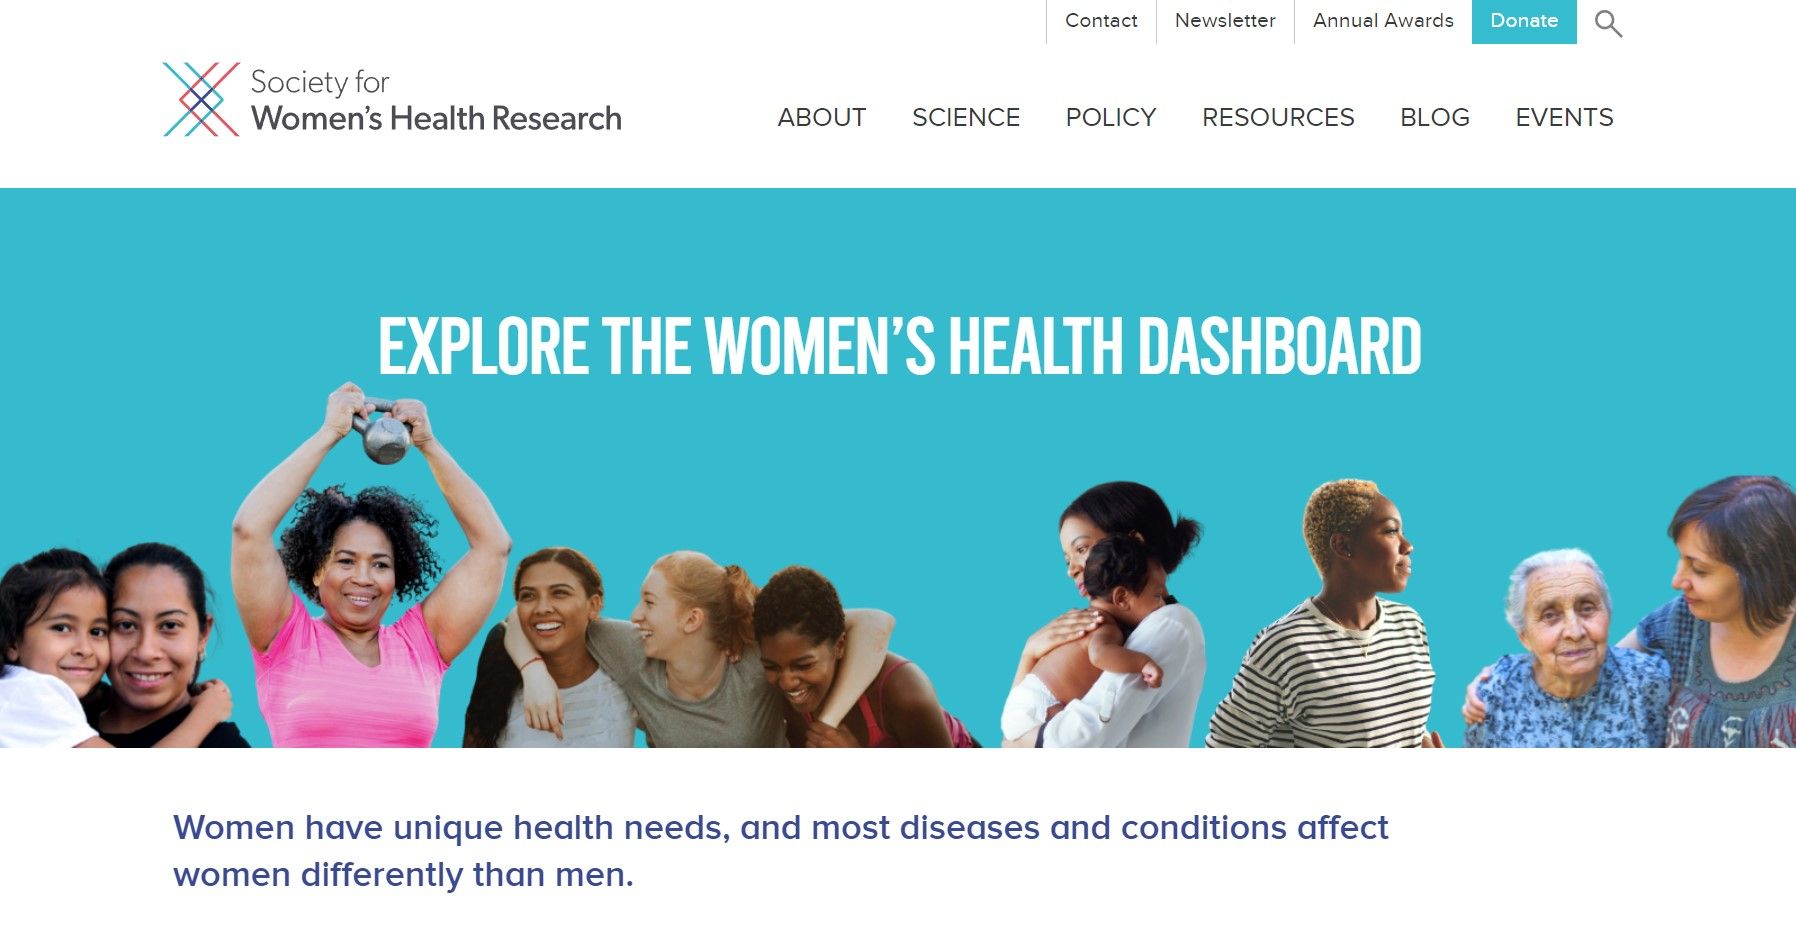 Screenshot of the Society for Women's Health Research website